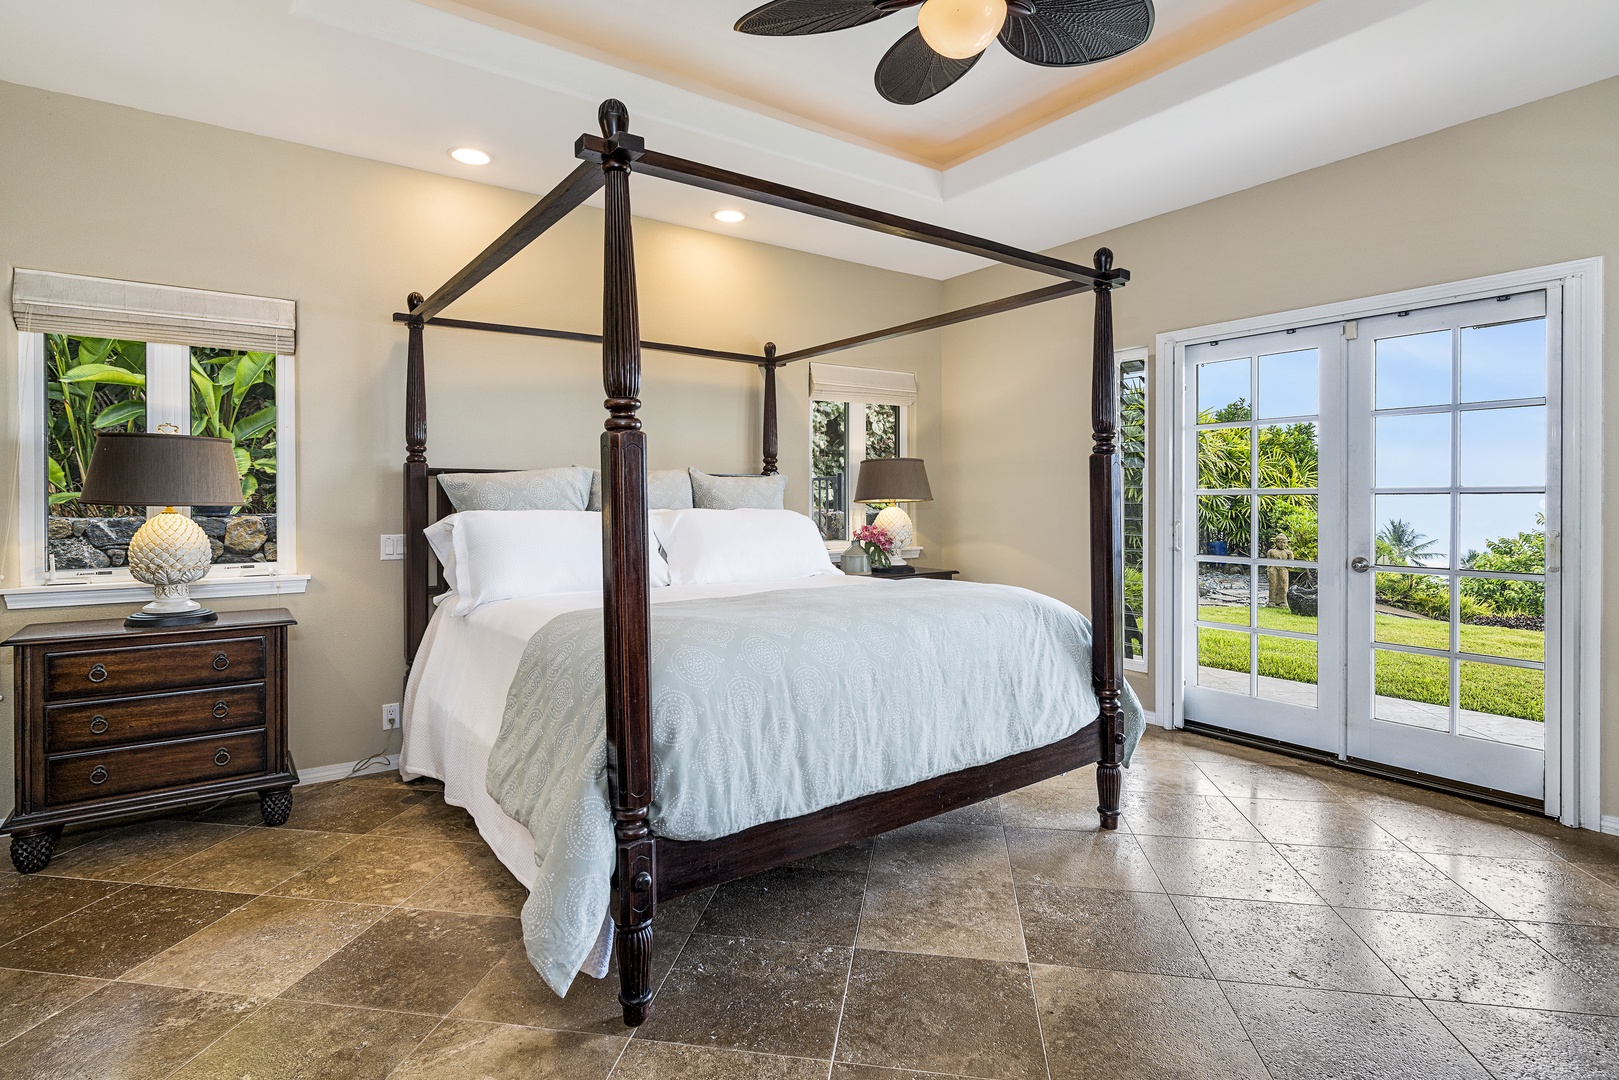 Kailua Kona Vacation Rentals, Sunset Hale - Gorgeous Primary bedroom with King bed and Lanai Access (A/C equipped)